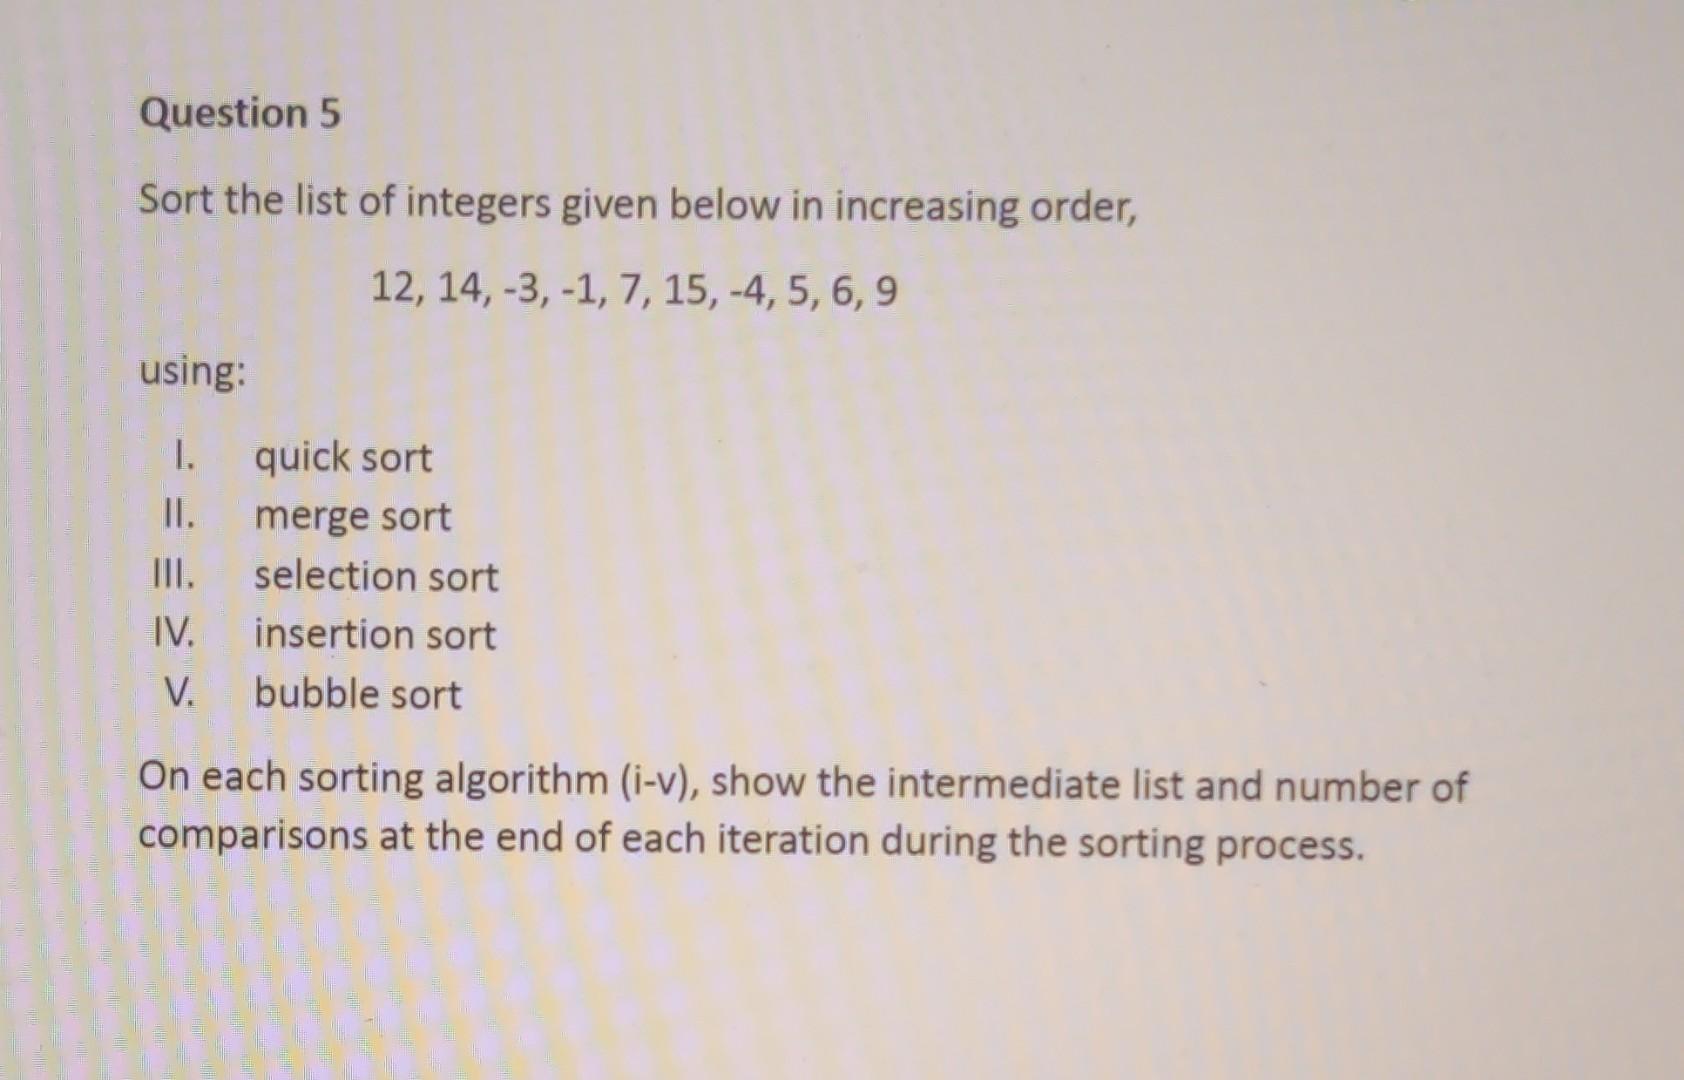 Question 5 Sort the list of integers given below in increasing order, 12, 14, -3, -1, 7, 15, -4, 5, 6, 9